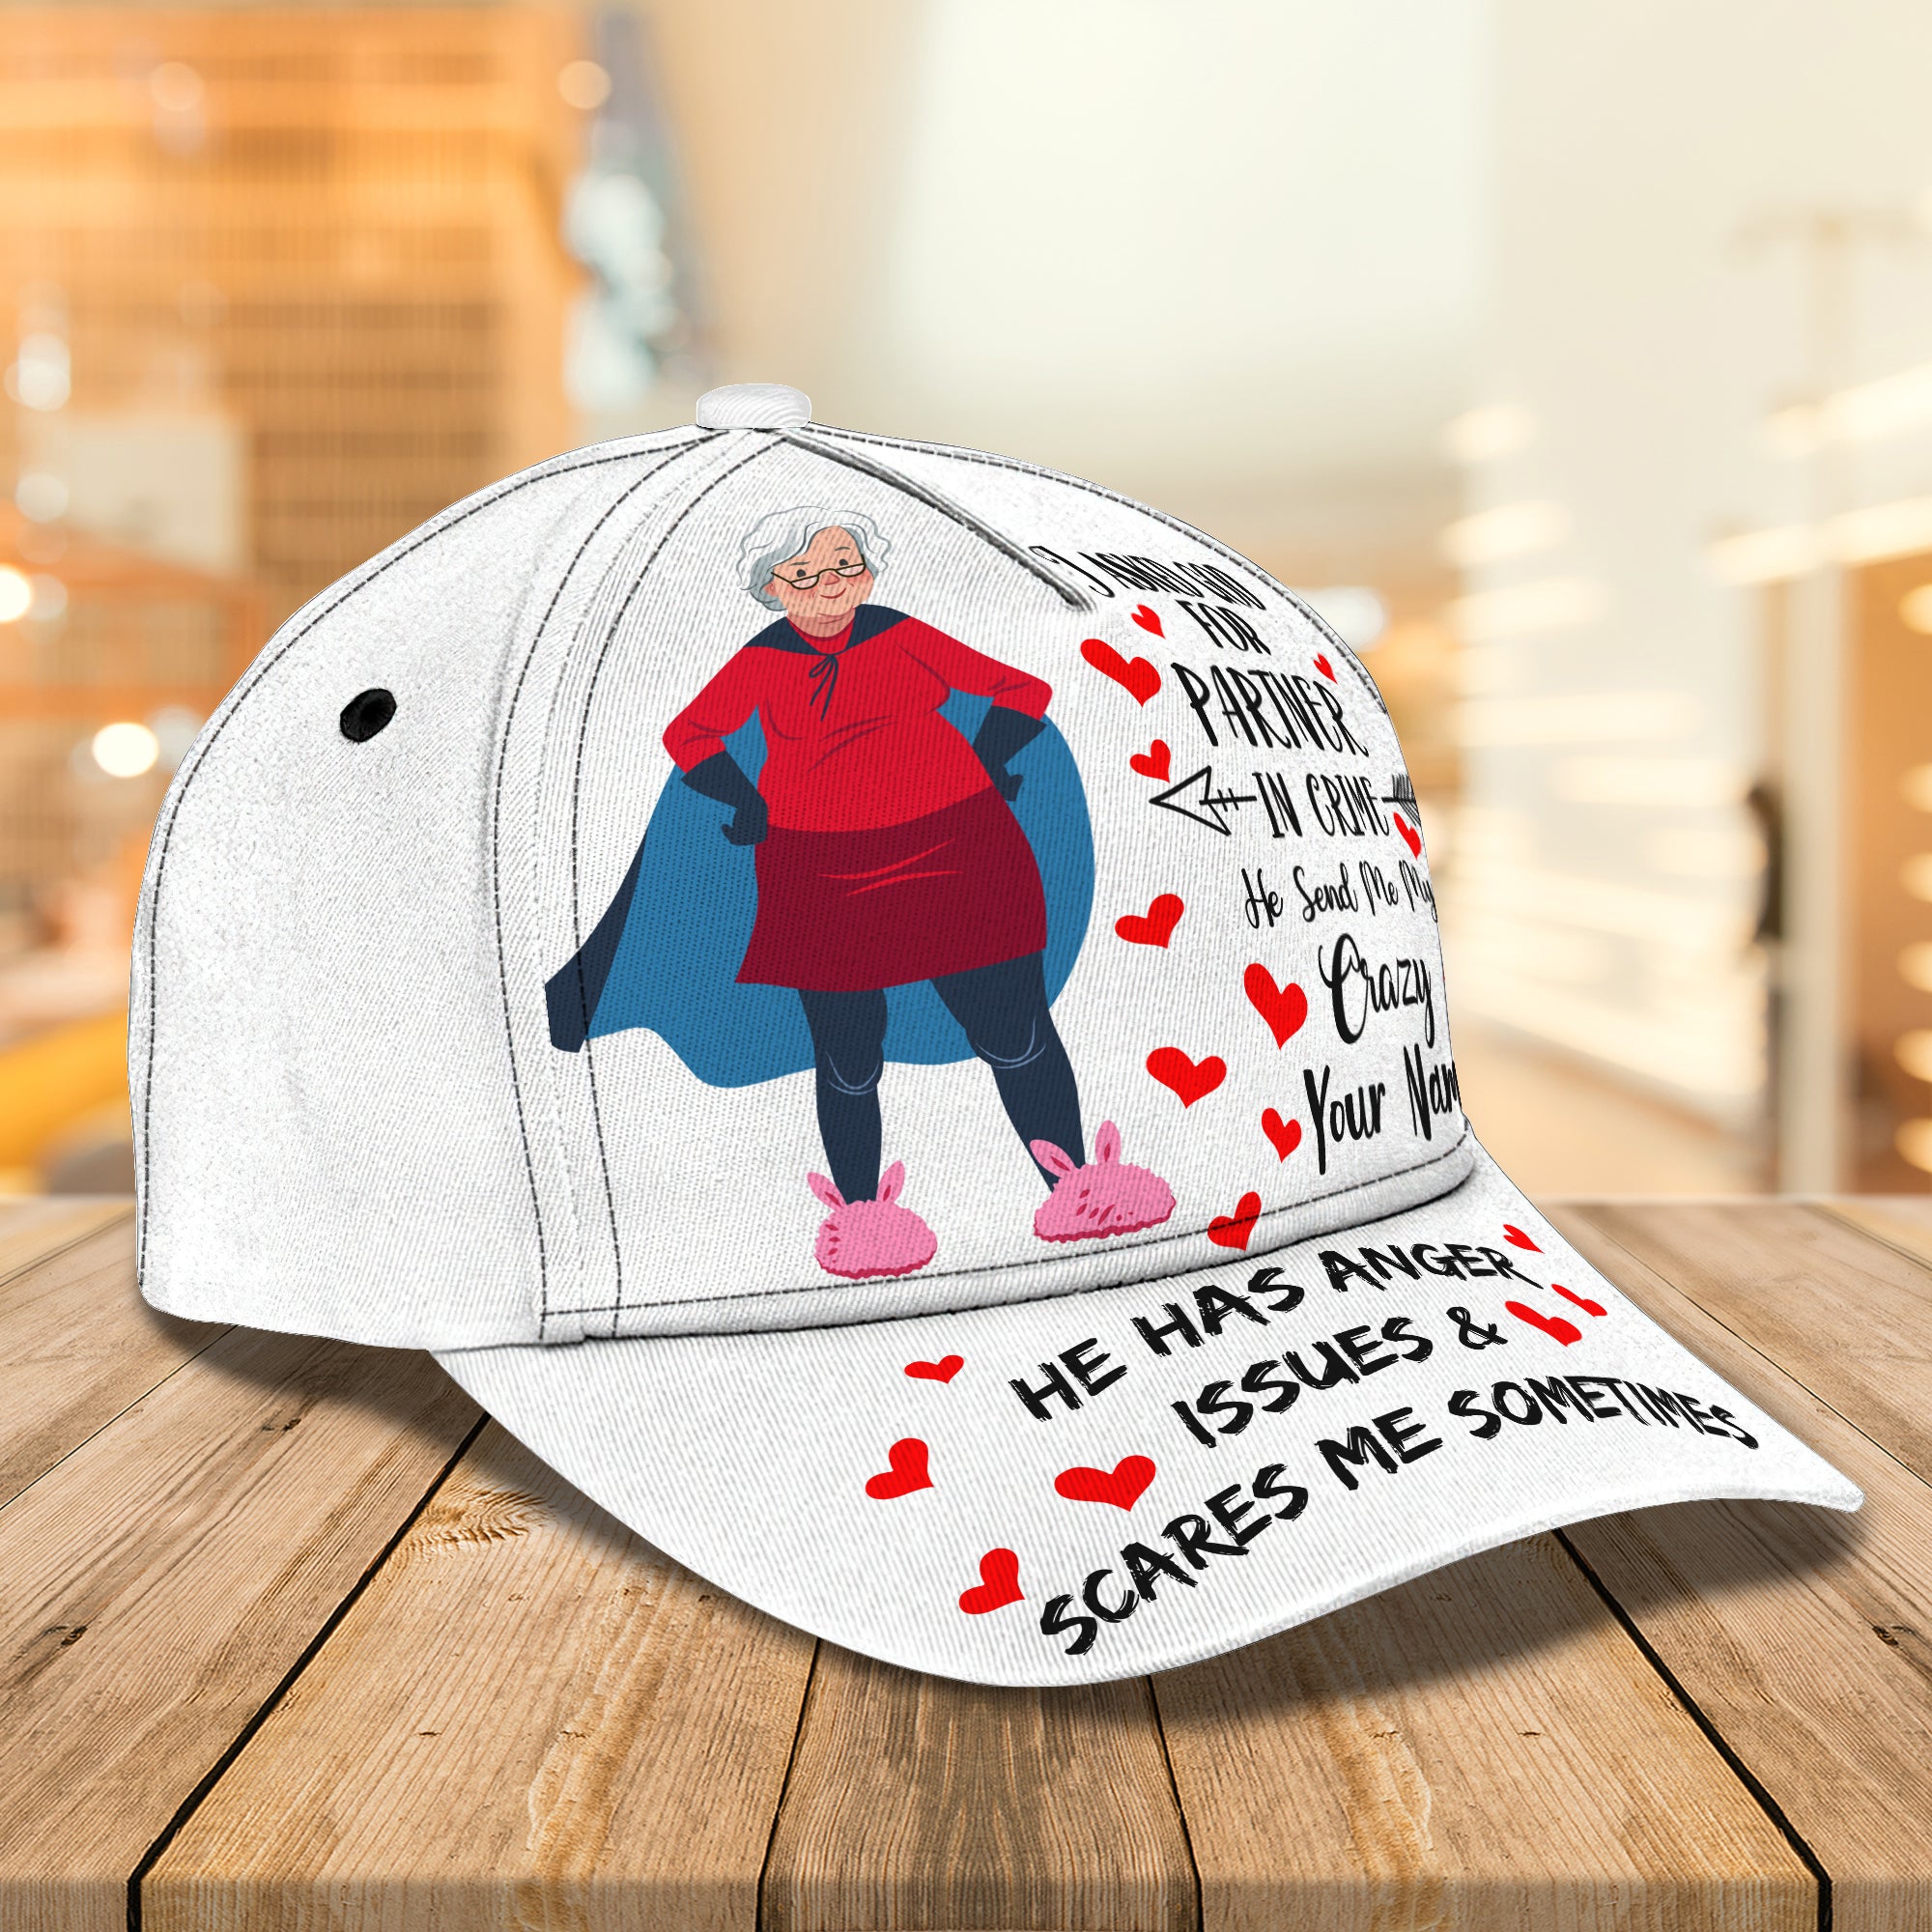 Partner in crime - Personalized Name Cap - Co98